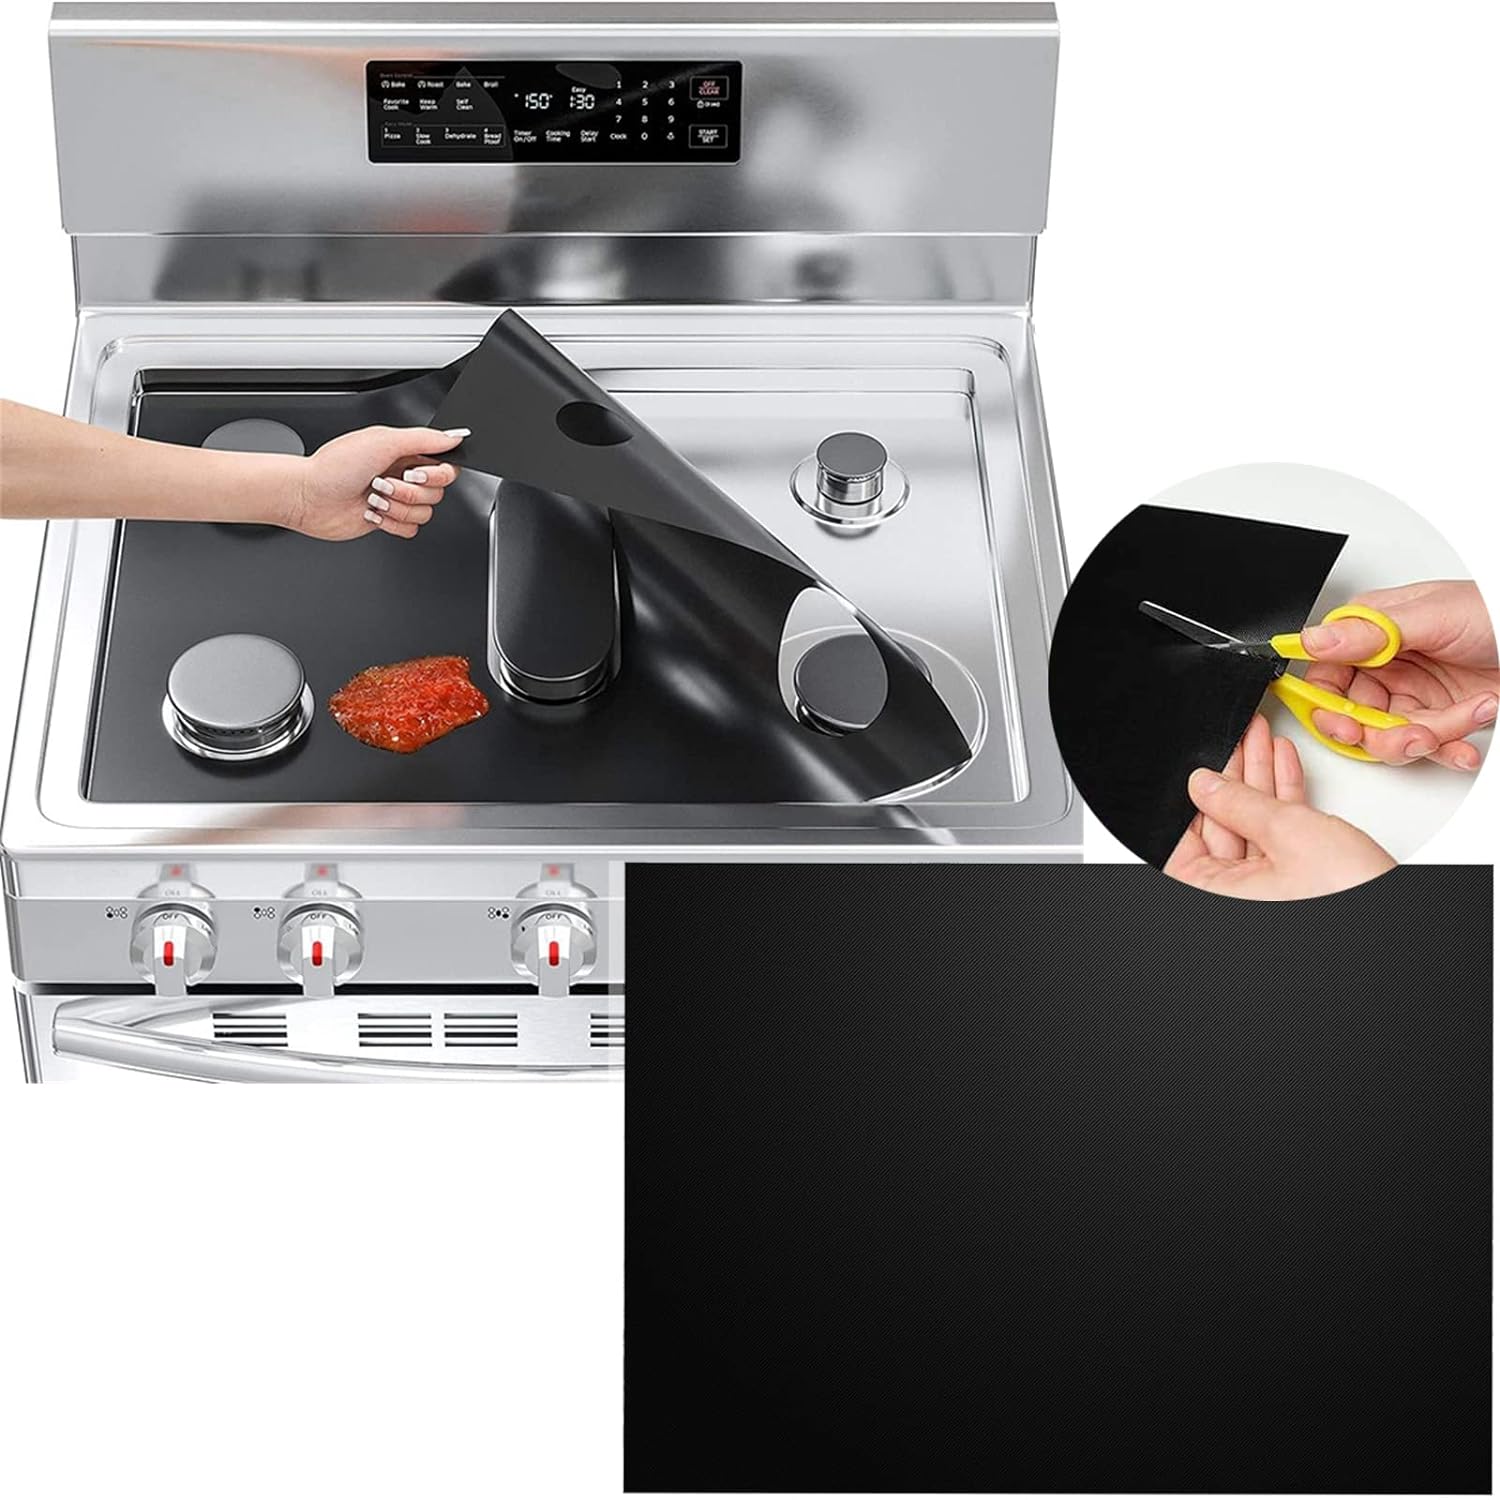 DAORDAER FD4fgf5561 1PCS Stove Covers for Gas Burners Stove Top